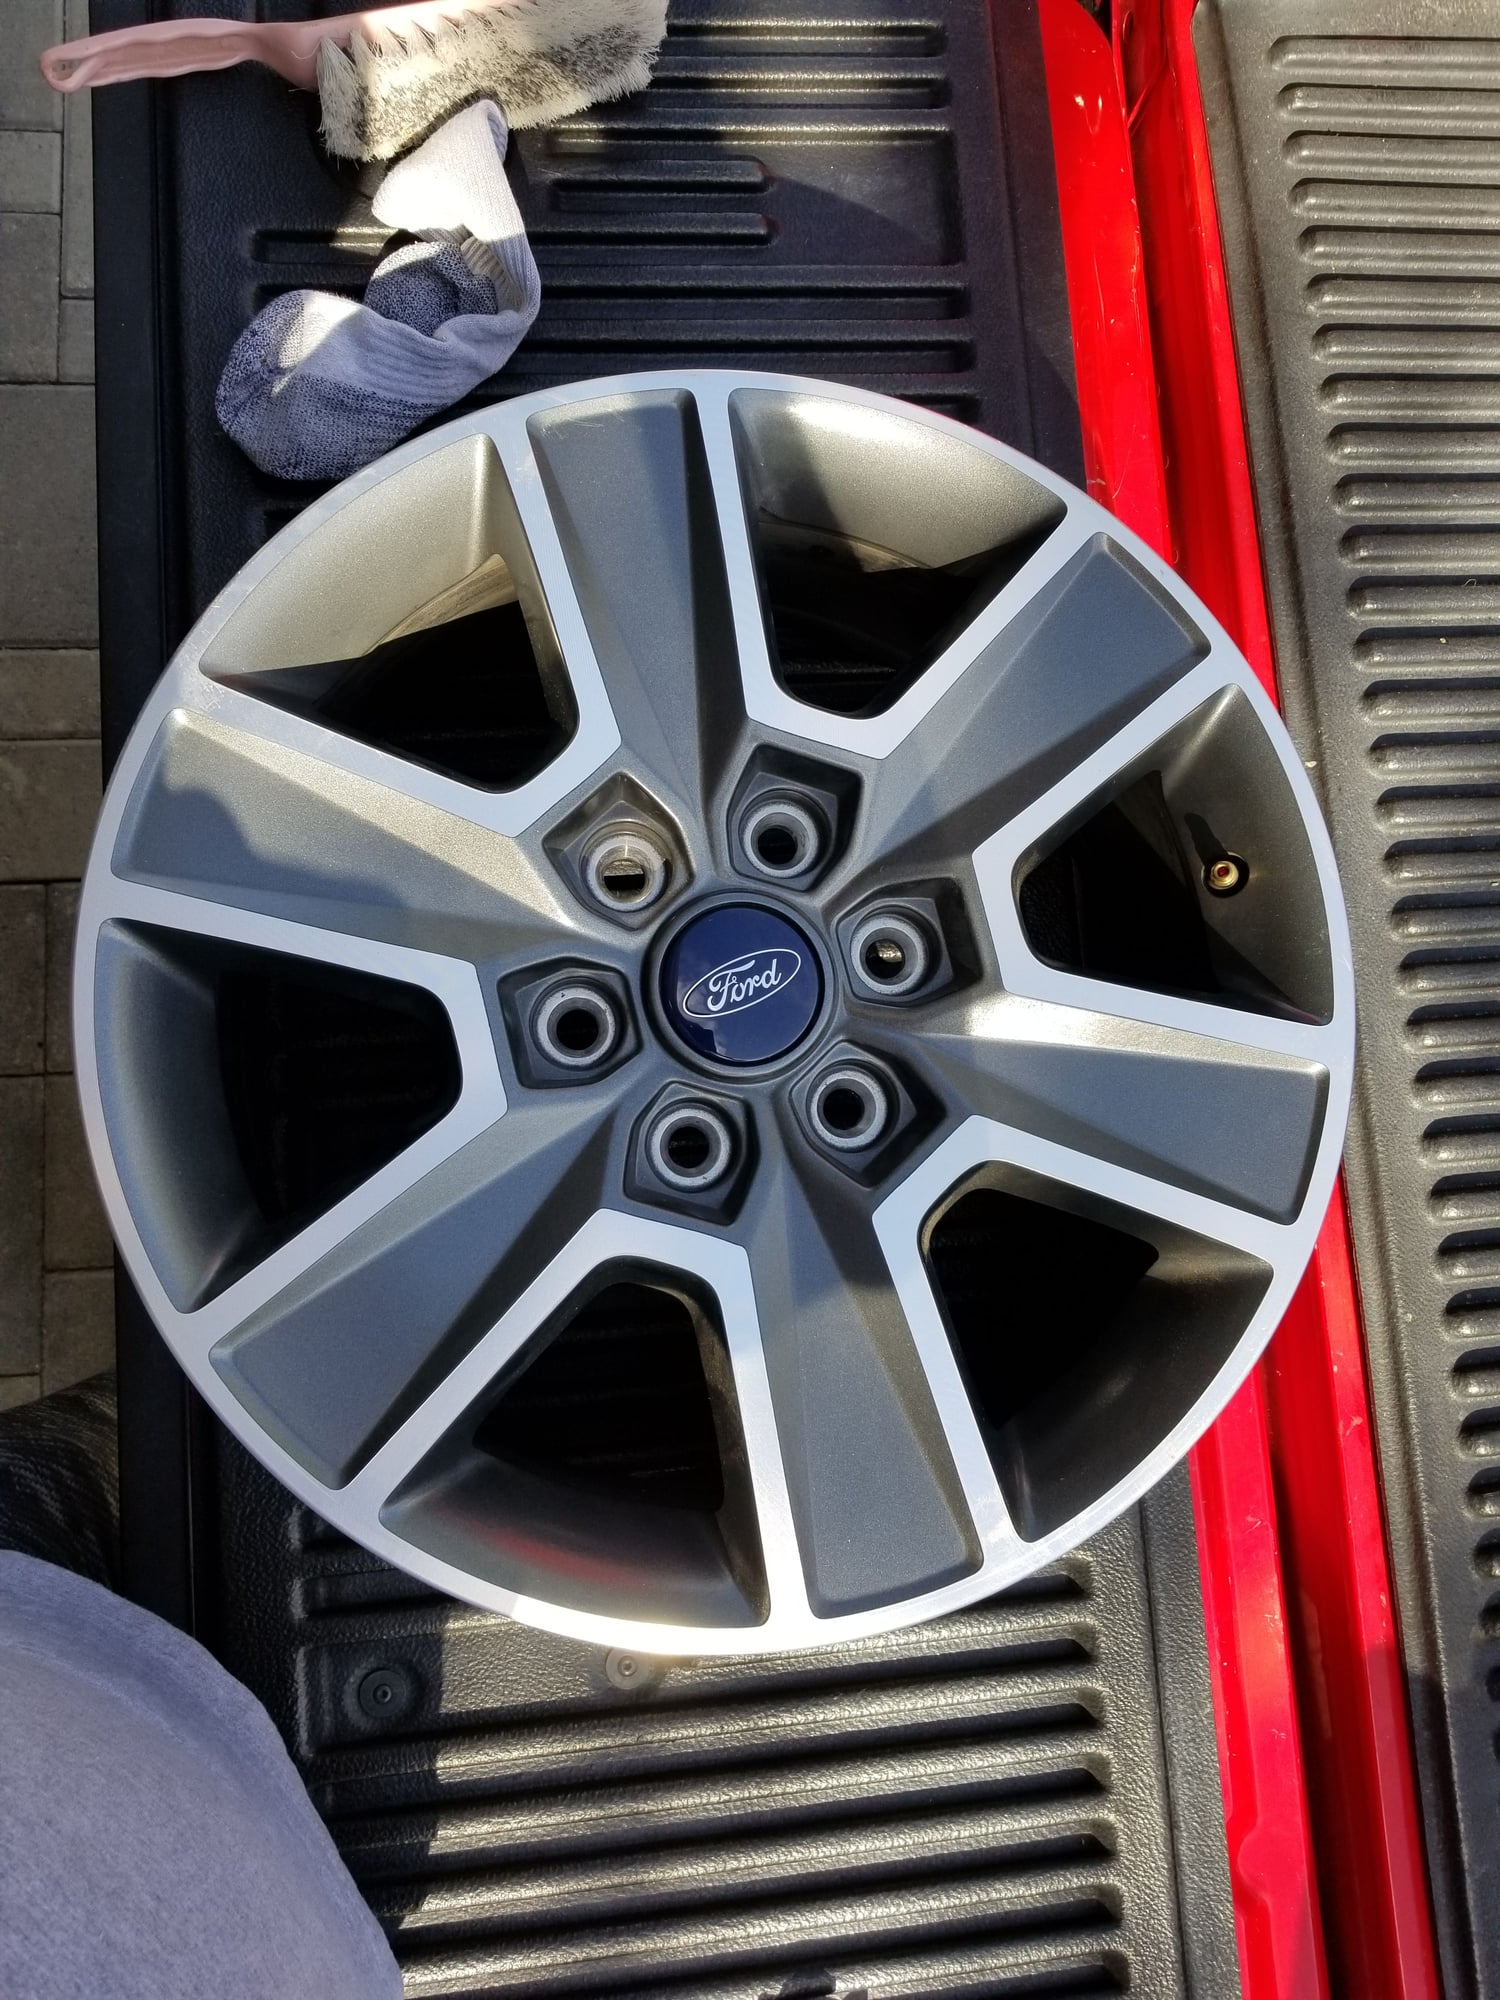 Wheels and Tires/Axles - 2017 F150 18" Alloy Wheels - Used - 2015 to 2021 Ford F-150 - Pasadena, CA 91106, United States